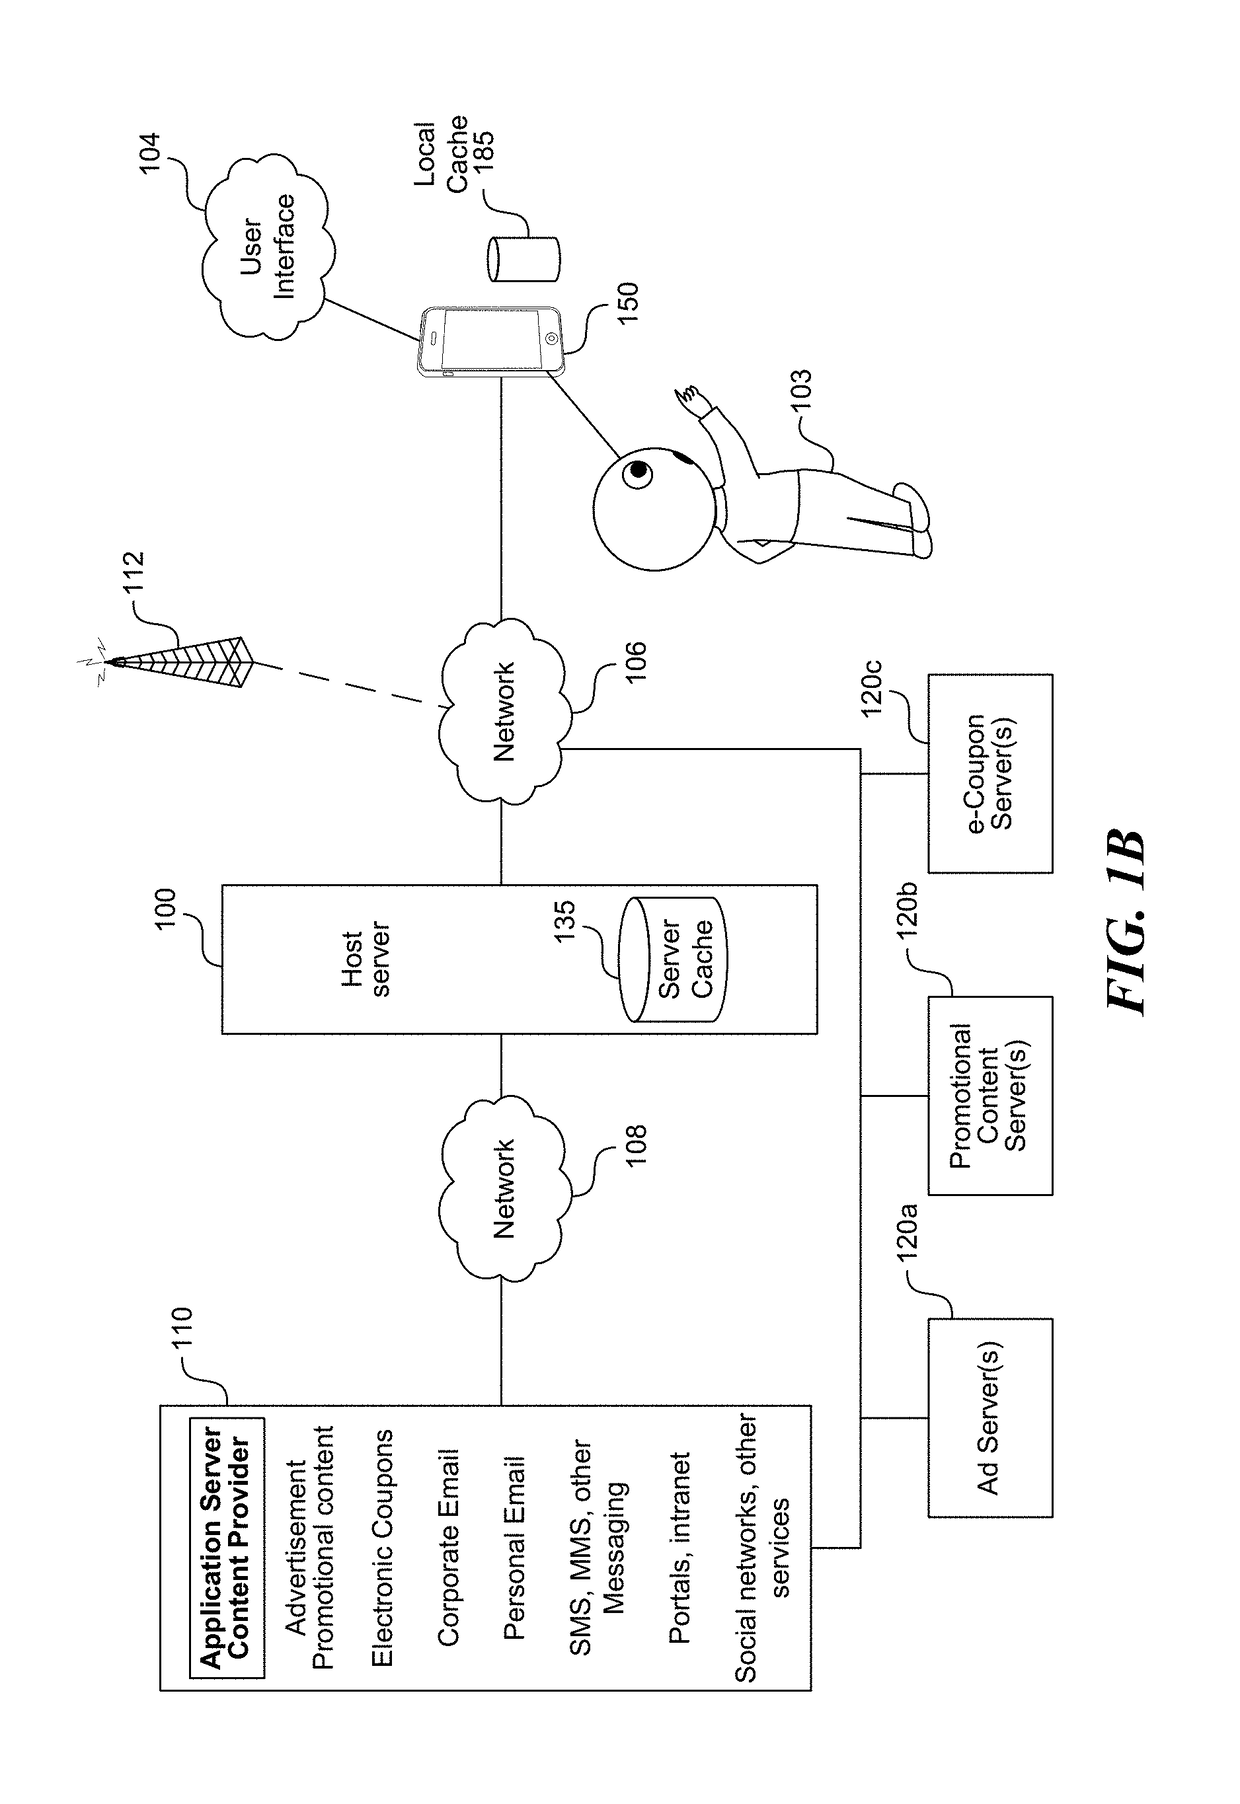 Mobile device equipped with mobile network congestion recognition to make intelligent decisions regarding connecting to an operator network for optimize user experience